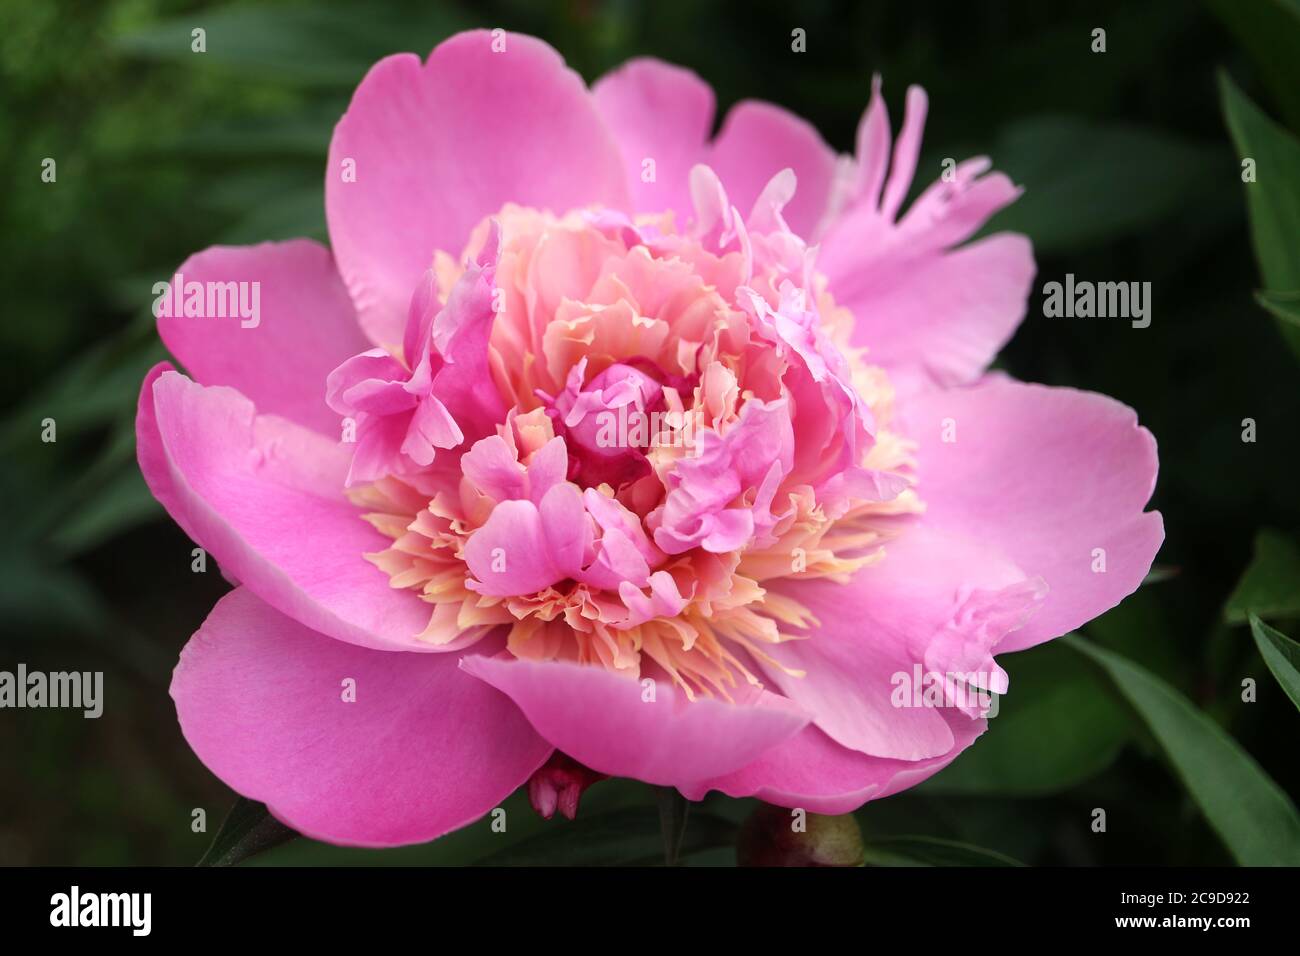 Pink-Beige Peony with delicate petals and green leaves in the garden, peony with pink-beige color petals,pink flower macro,flower head,blooming peony, Stock Photo